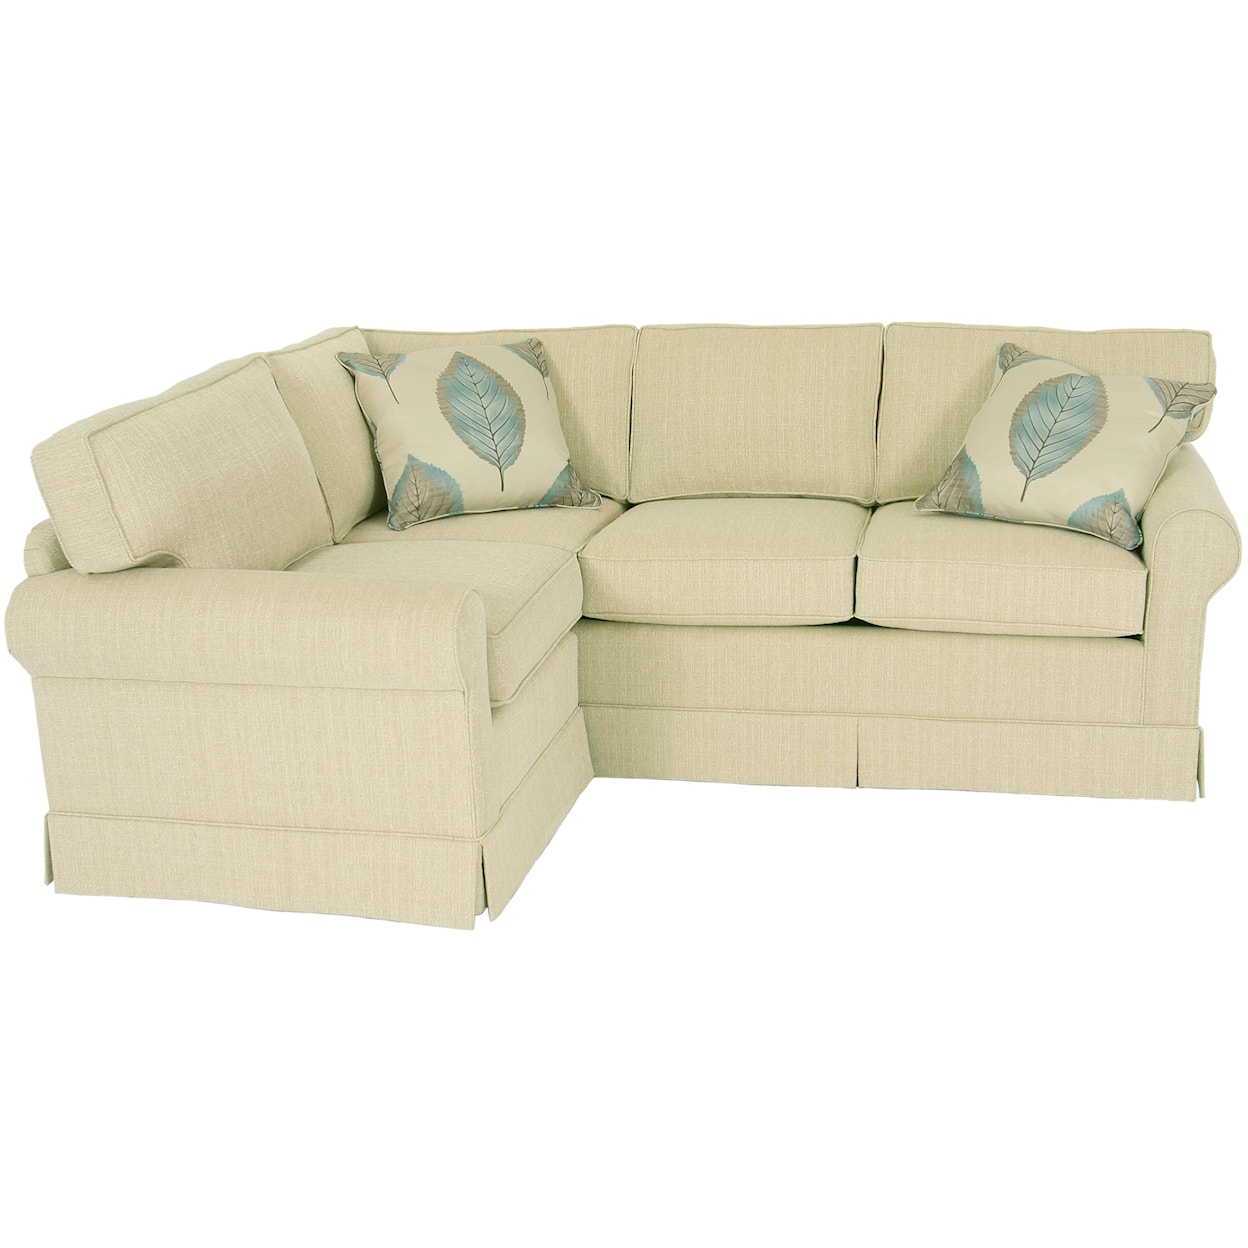 Norwalk Copley Square Sectional